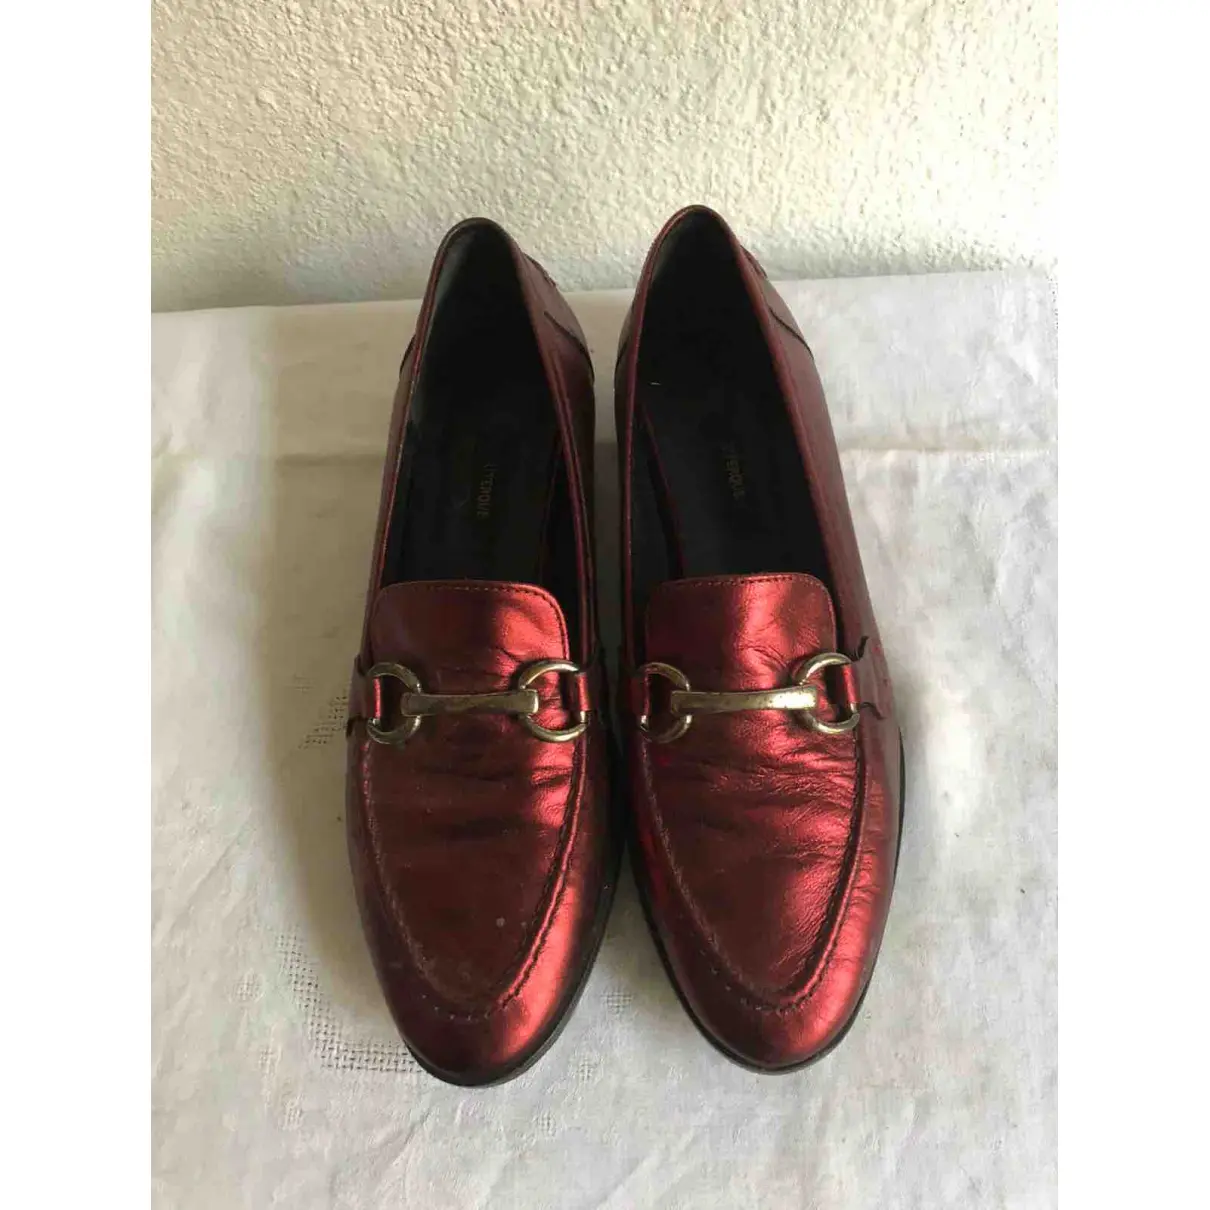 Buy Uterque Leather flats online